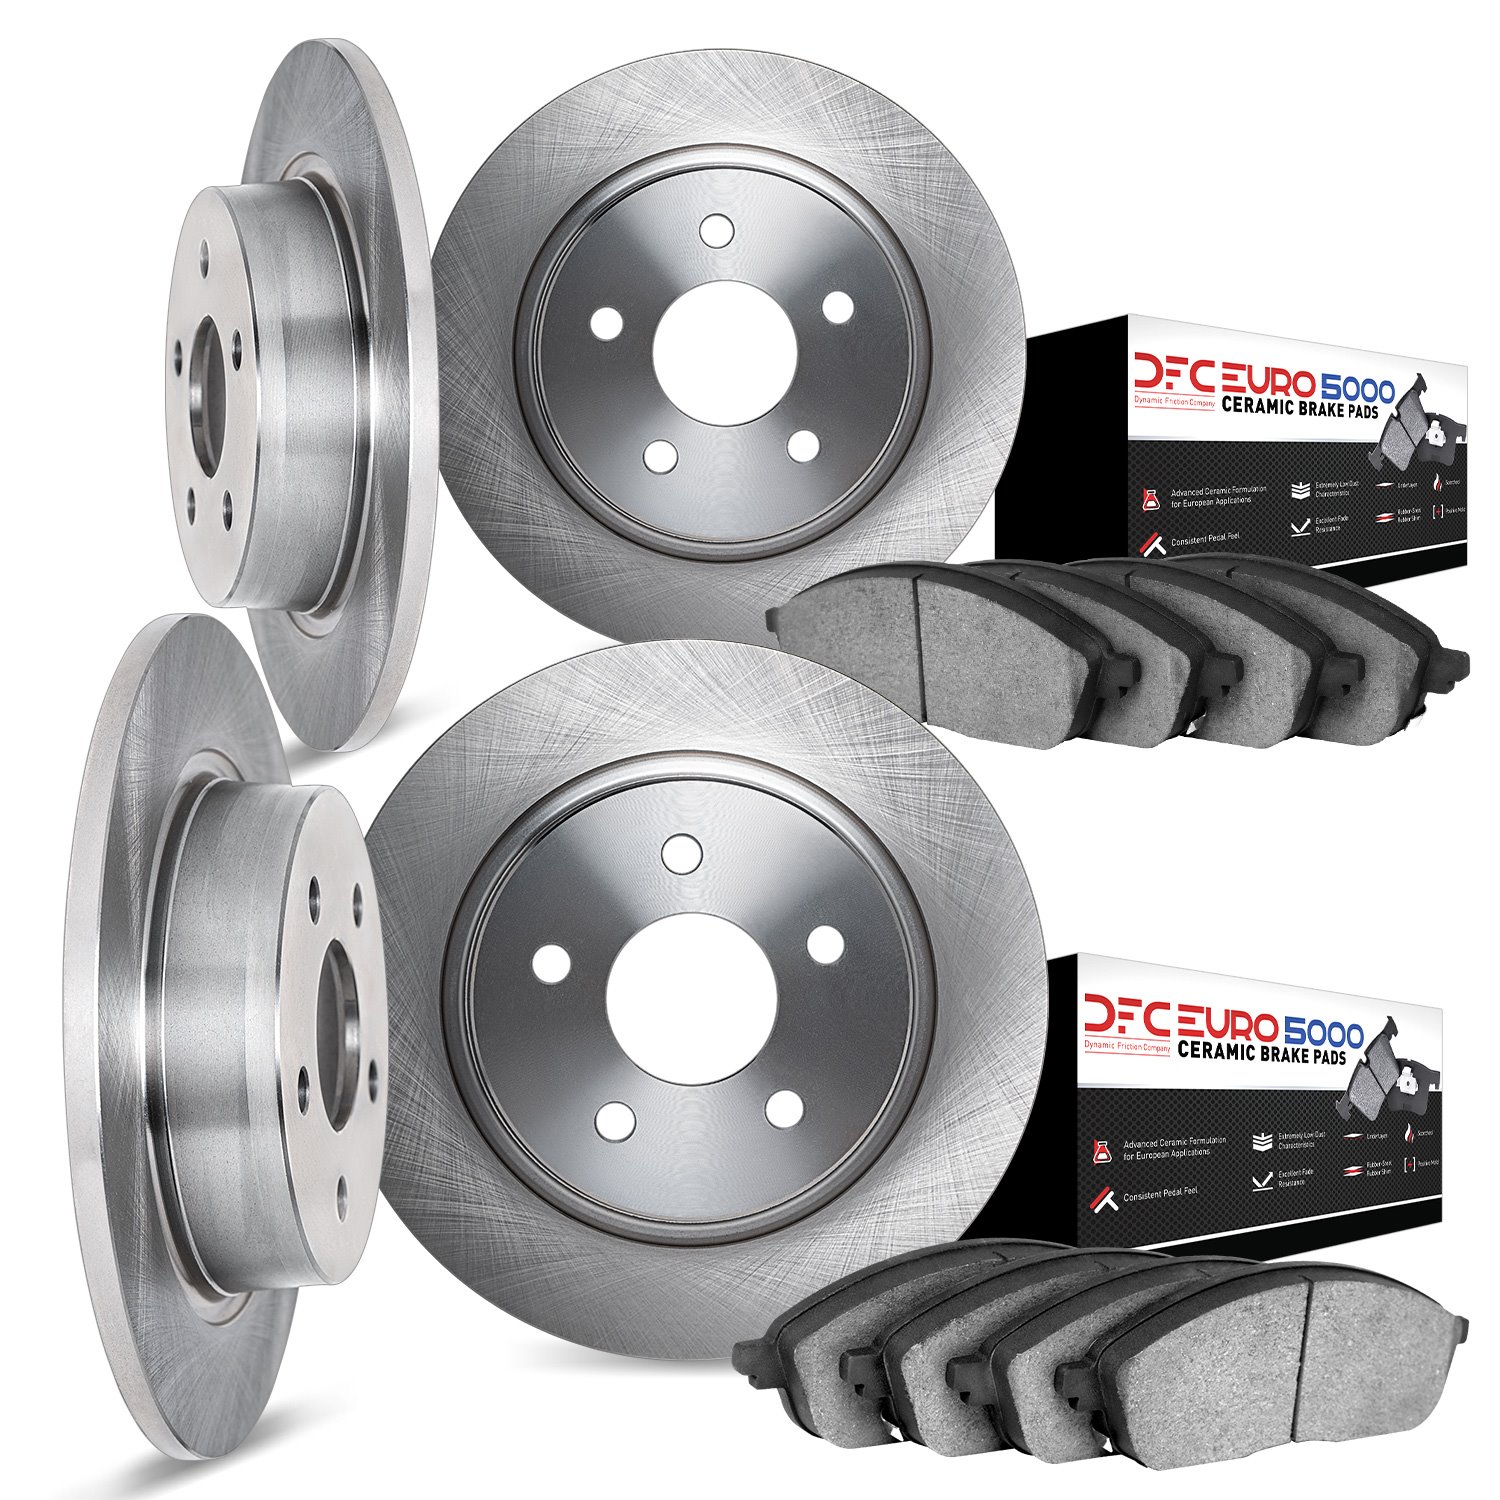 6604-63004 Brake Rotors w/5000 Euro Ceramic Brake Pads, 1965-1973 Mercedes-Benz, Position: Front and Rear